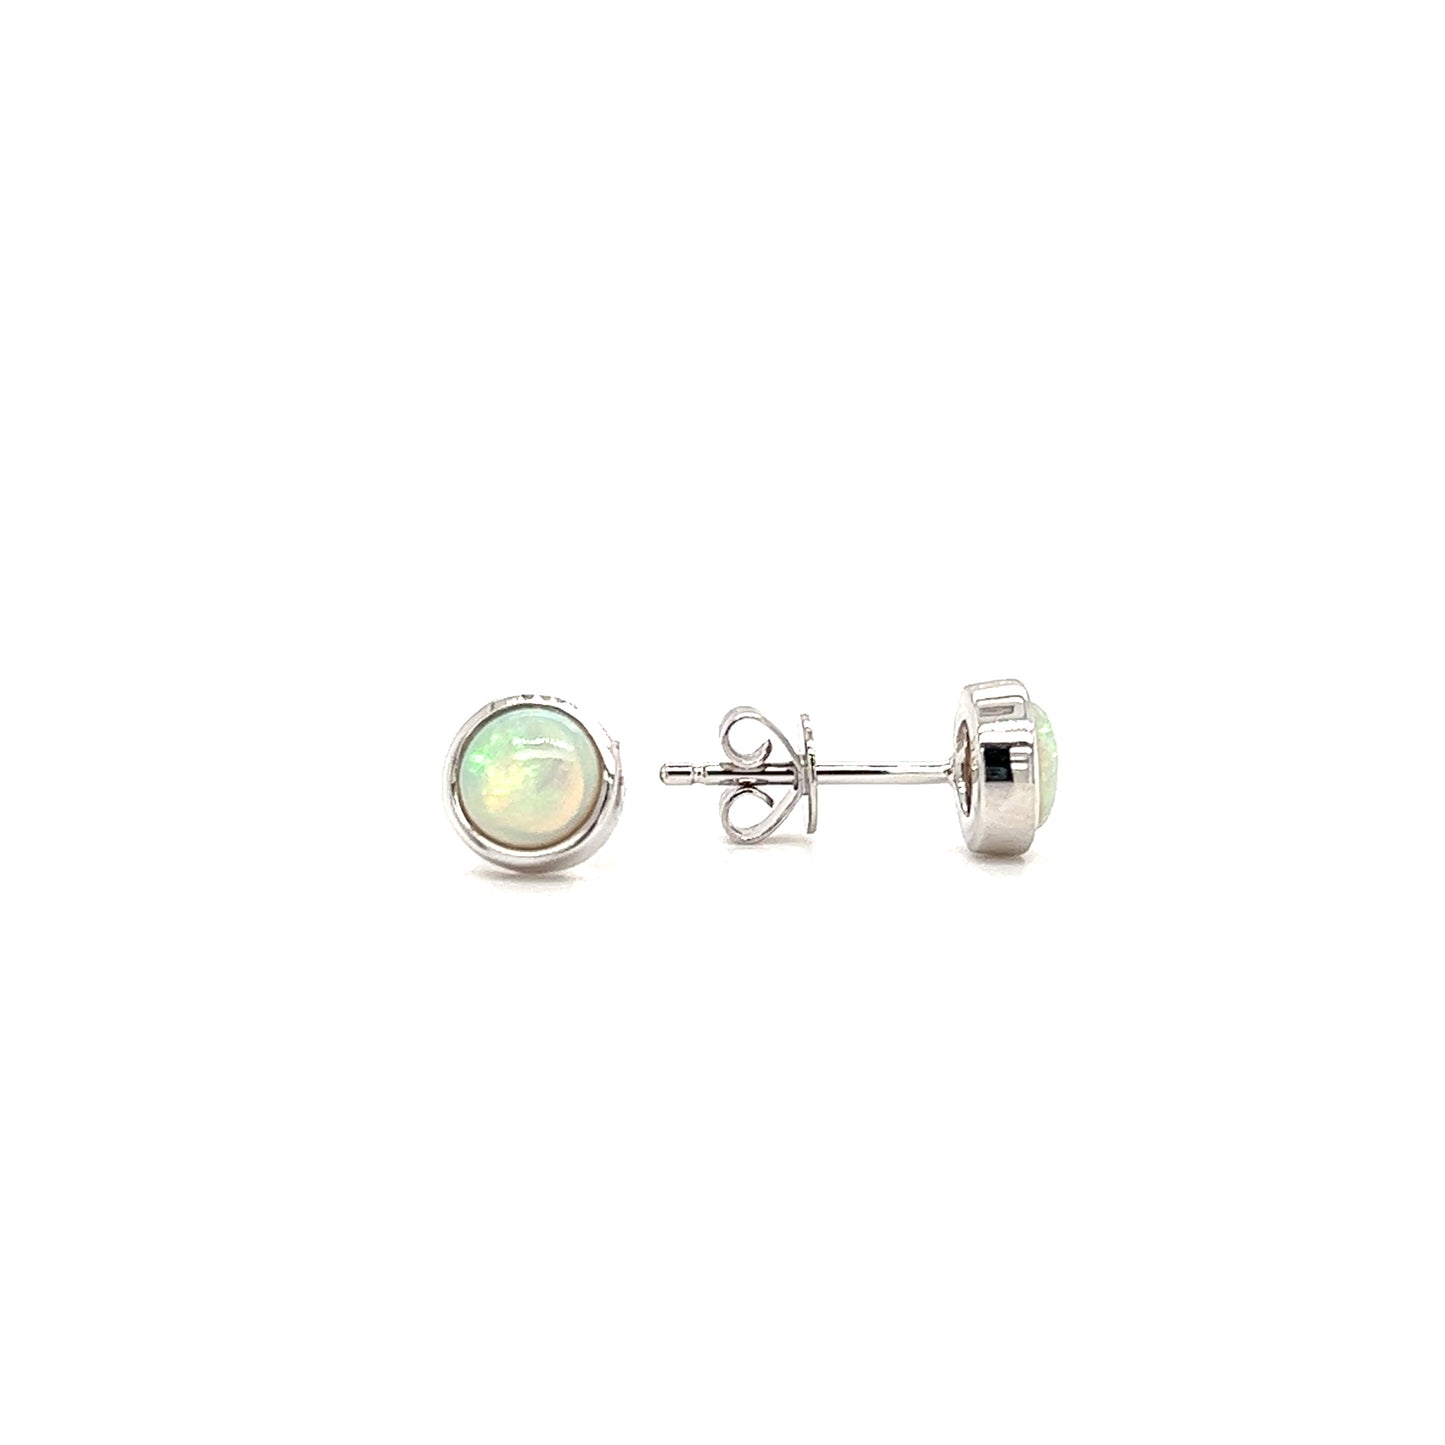 Opal Stud Earrings with 0.66ctw of Opals in 14K White Gold Front and Side View